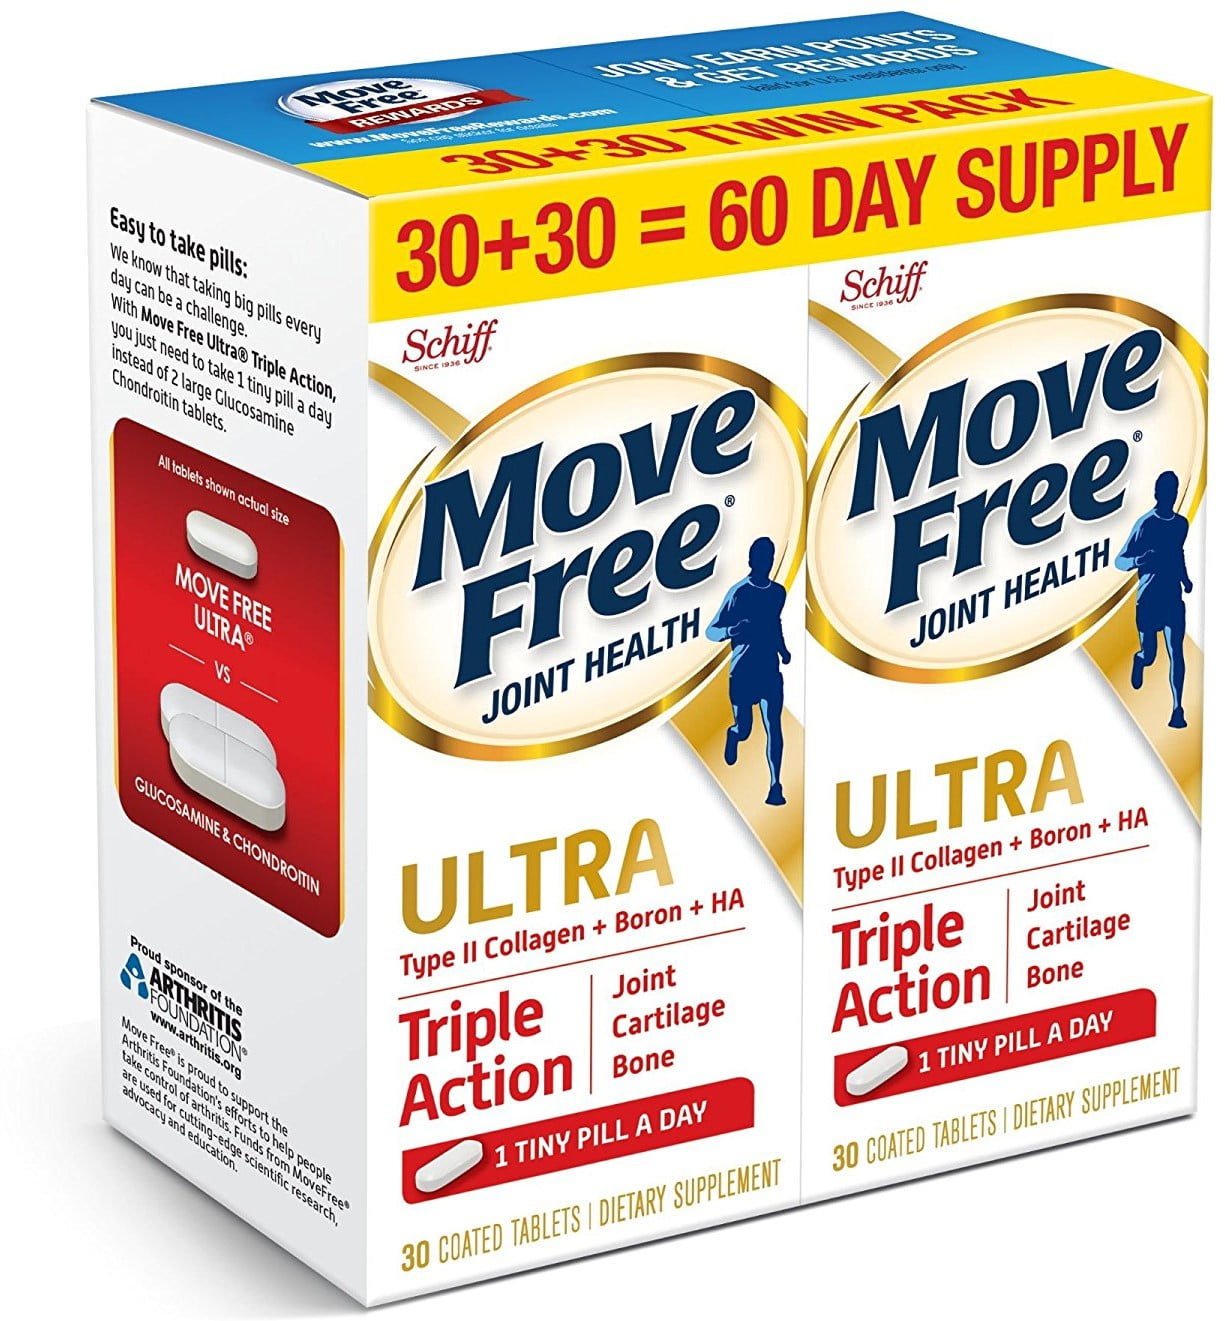 Move Free ultra (Triple action) – Mr Herb